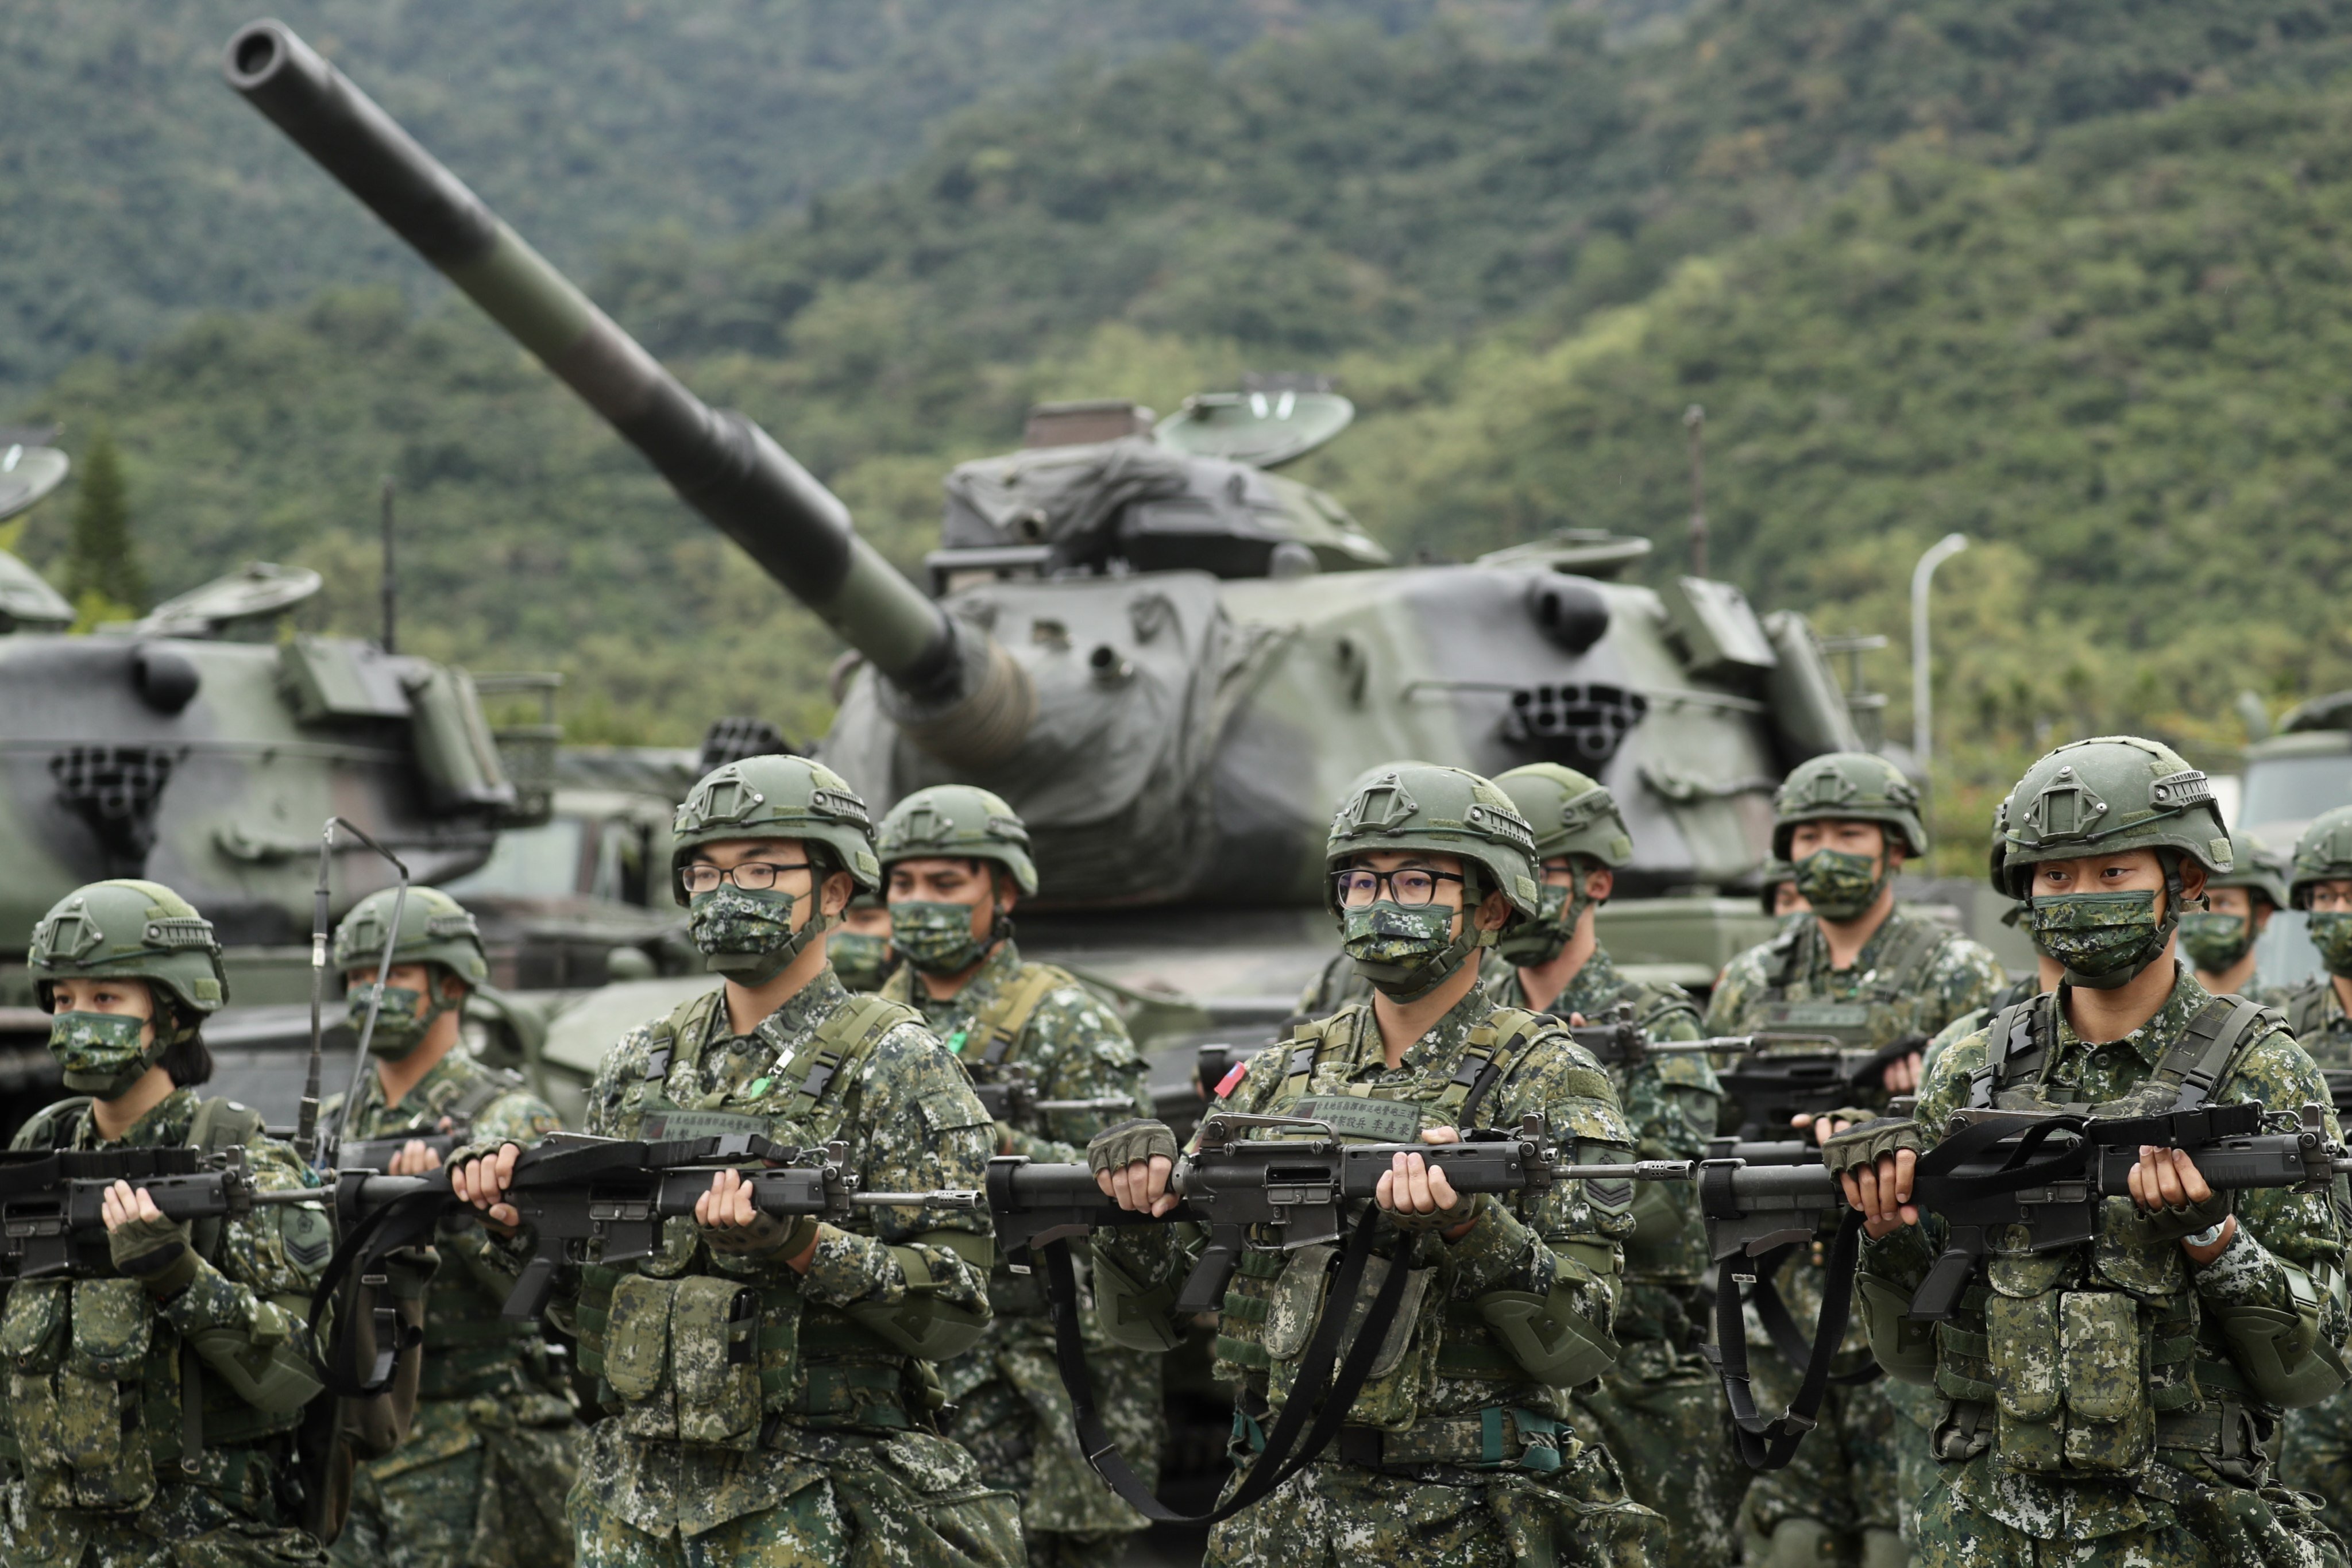 Taiwan looks at extending compulsory military service beyond 4 months | South China Morning Post